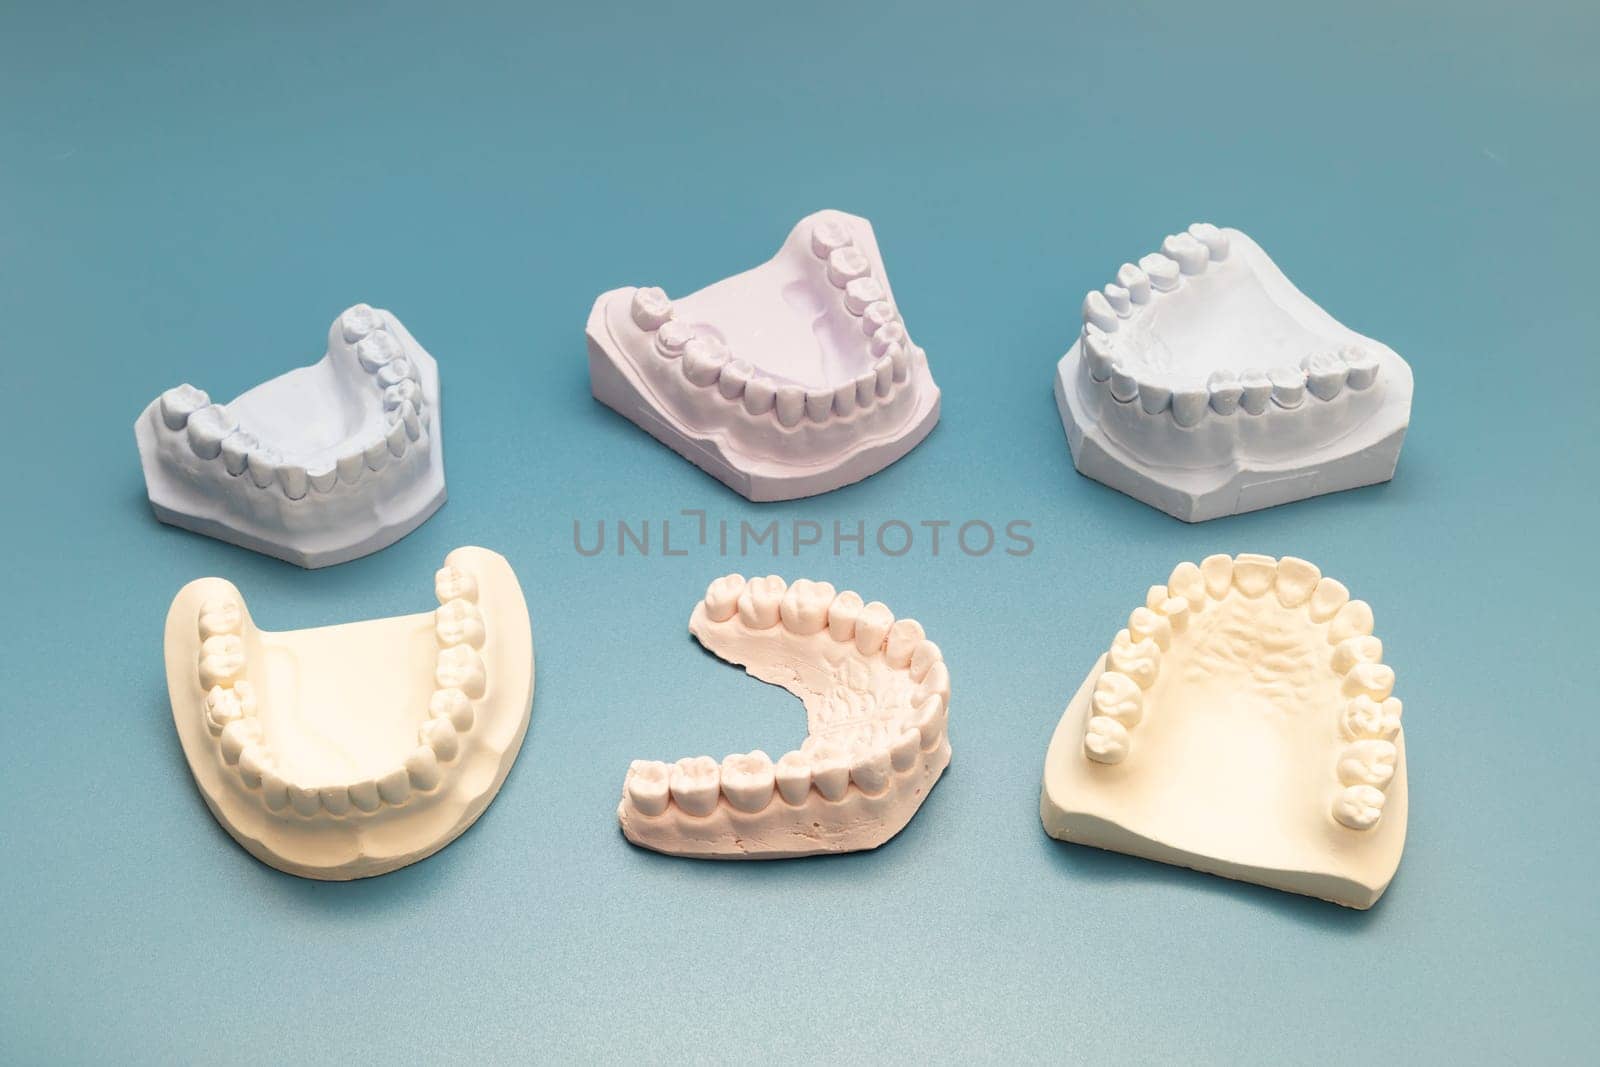 Many Die Stone, Plaster Cast Molds Of The Upper And Lower Jaws And Teeth With A Pliable Imprint In Dental Lab On Blue Background. Denture. Dental Gypsum Model, Prosthetics. Horizontal Plane